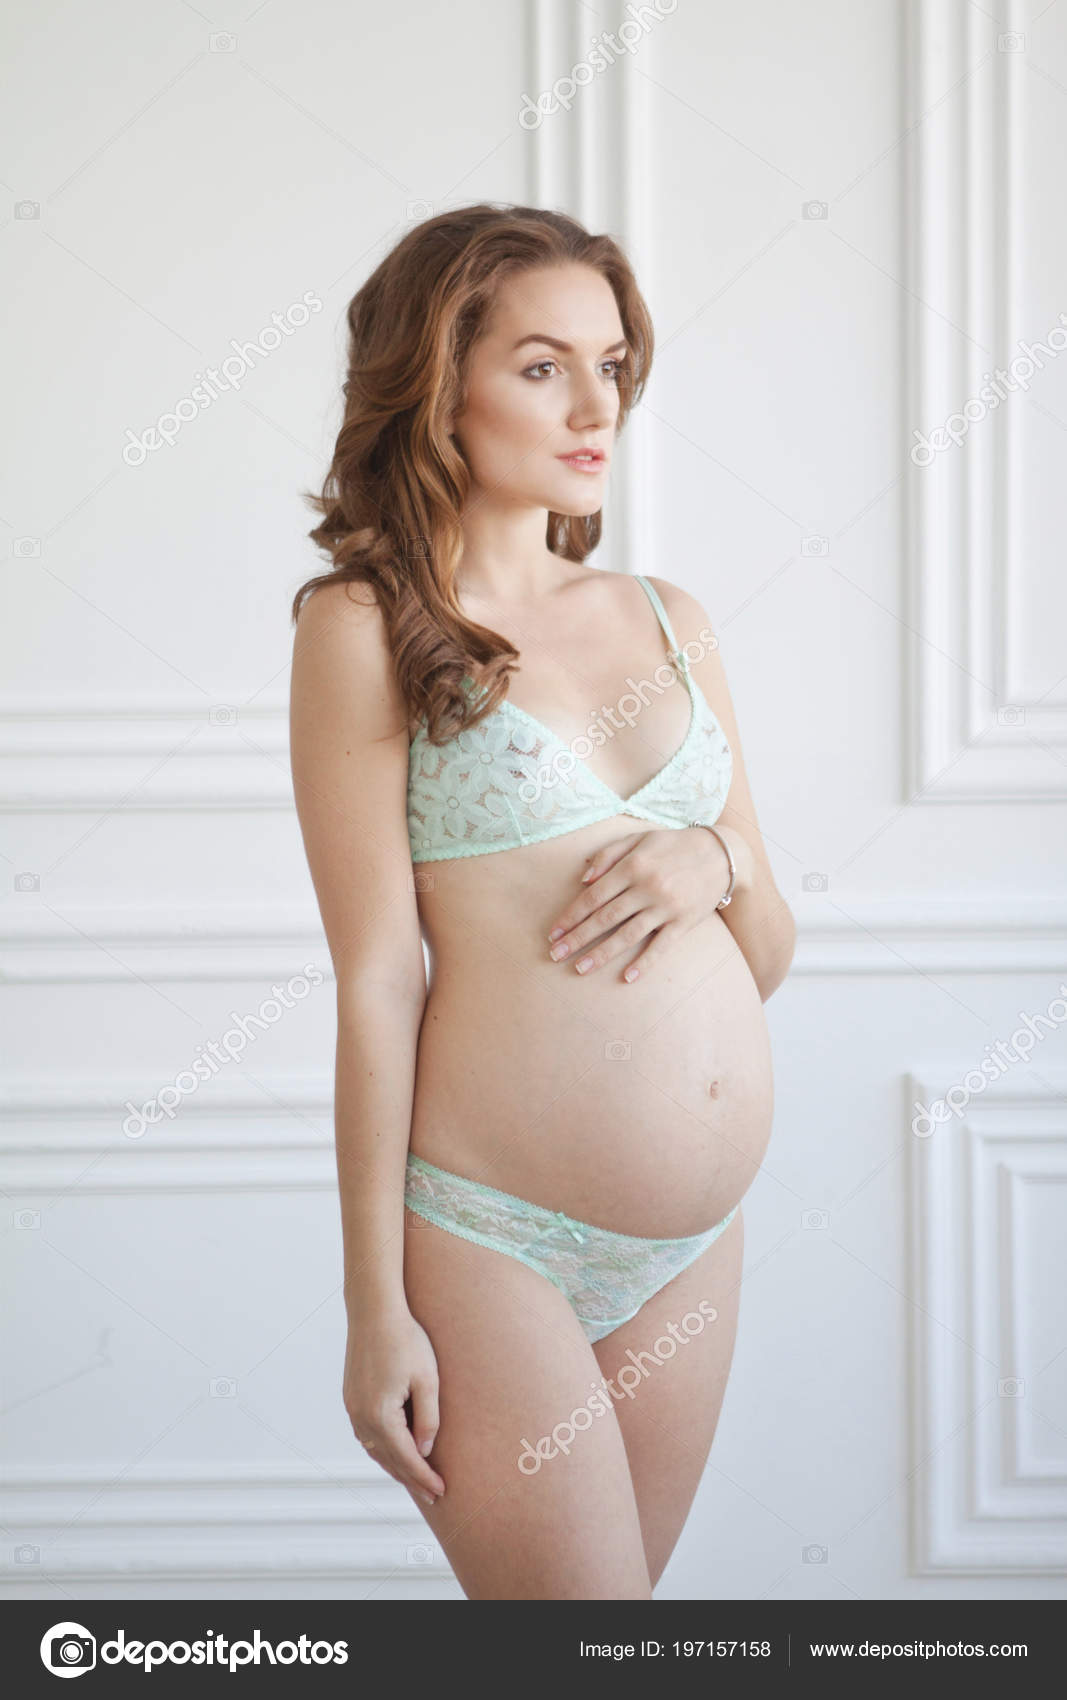 18,131 Pregnant Women Underwear Images, Stock Photos, 3D objects